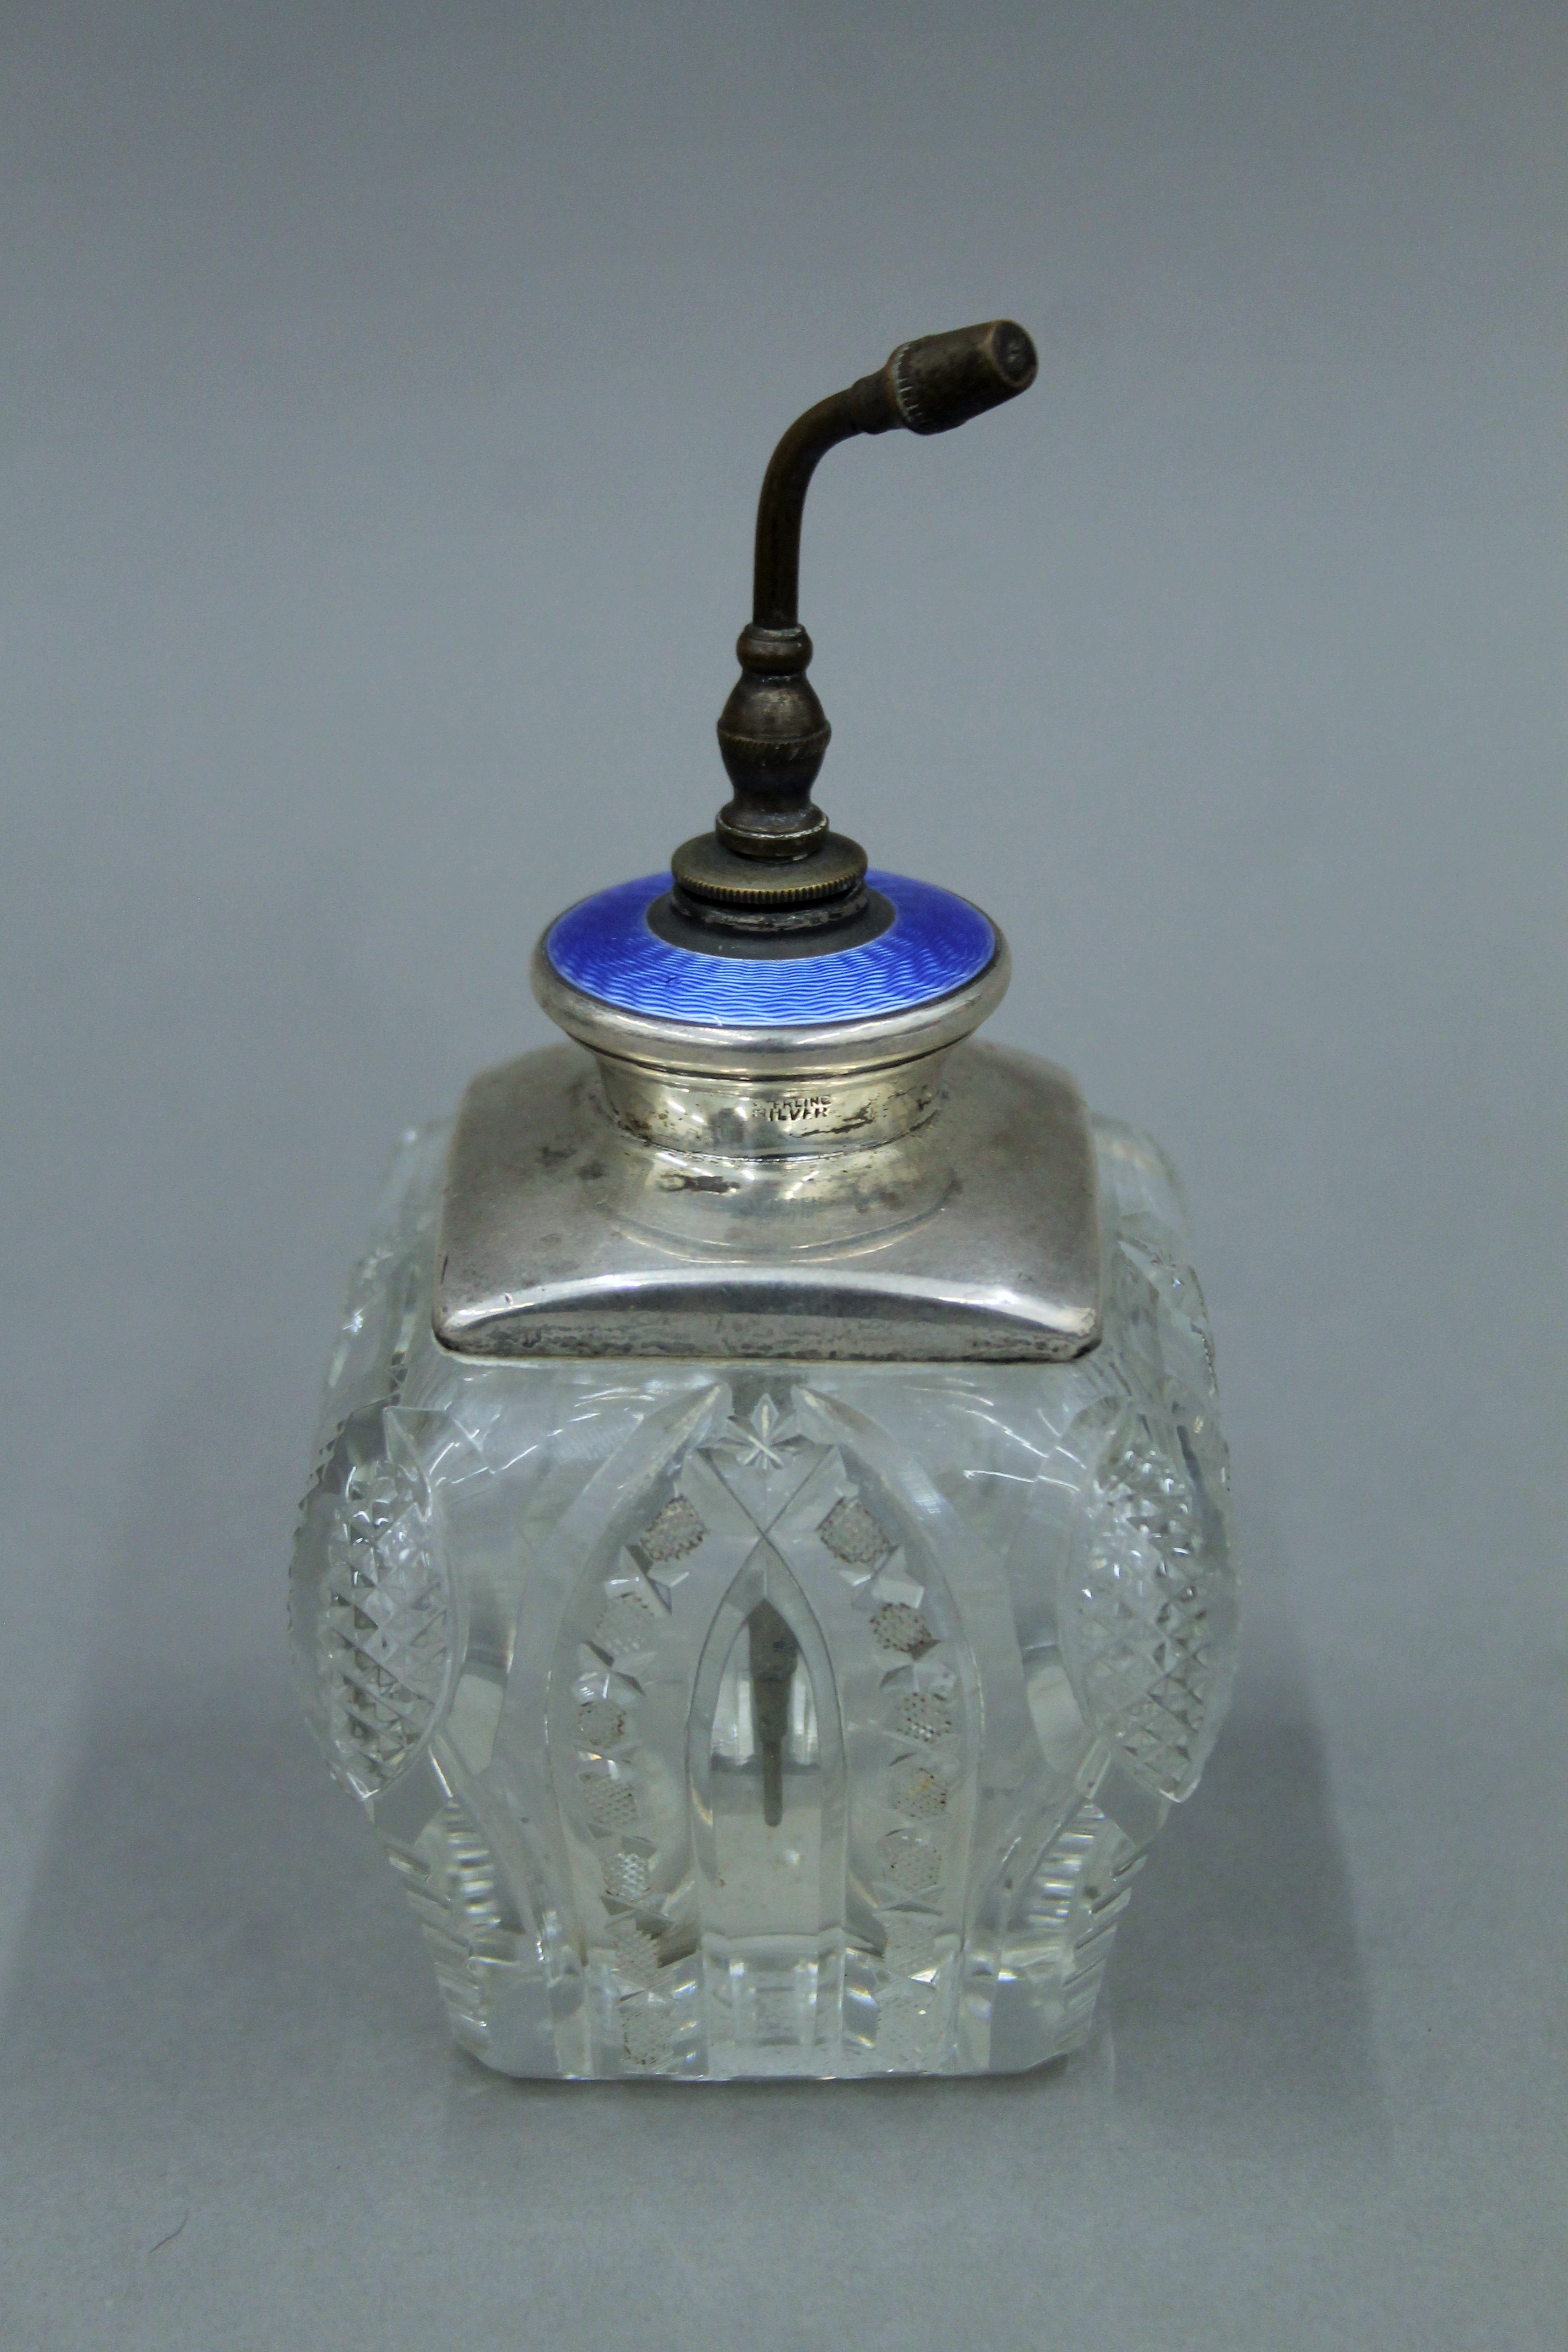 A sterling silver and blue enamel top cut glass atomiser. 15 cm high overall.